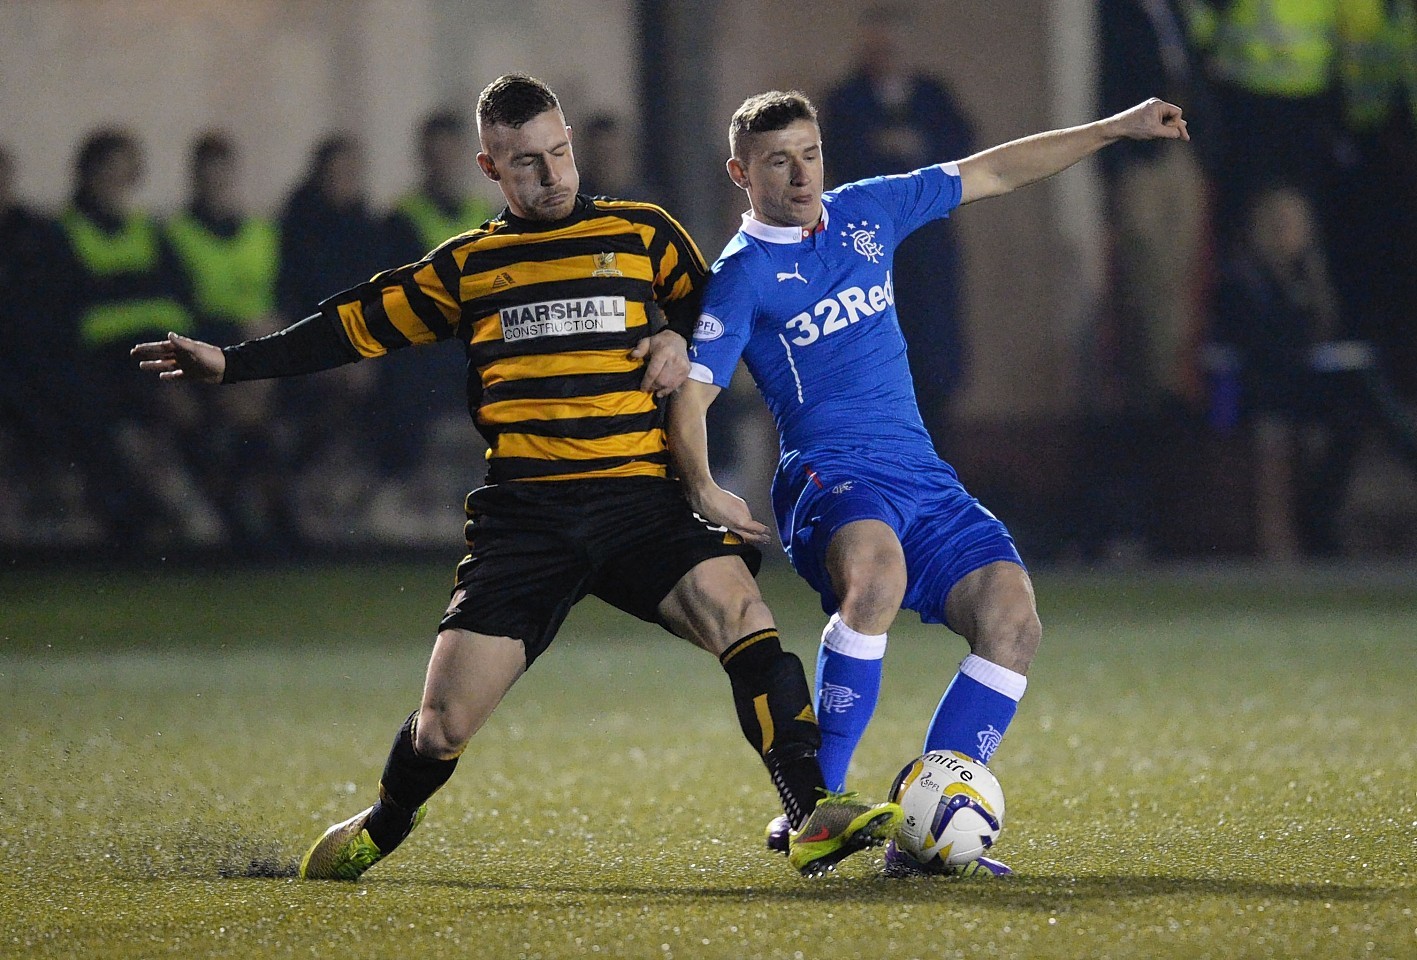 Meggatt has impressed for Alloa since signing in 2012